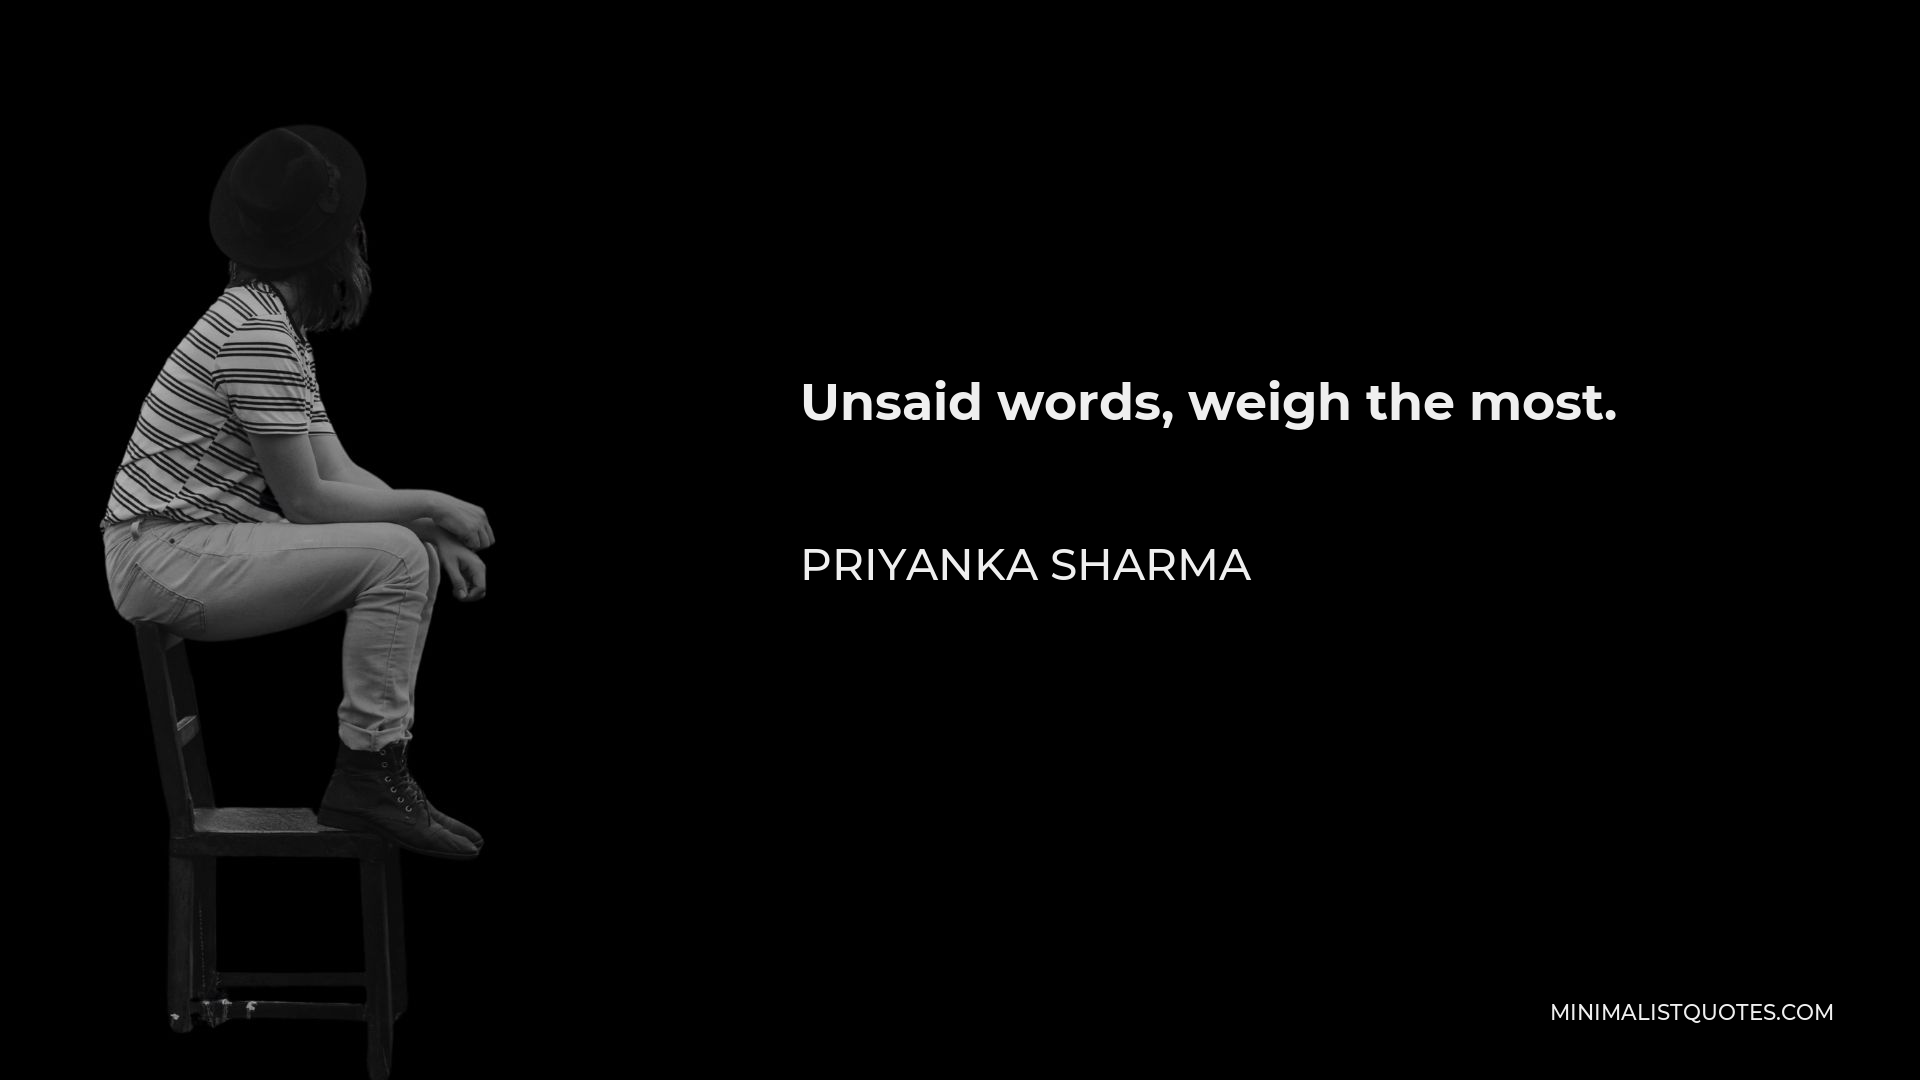 Priyanka Sharma Quote - Unsaid words, weigh the most.